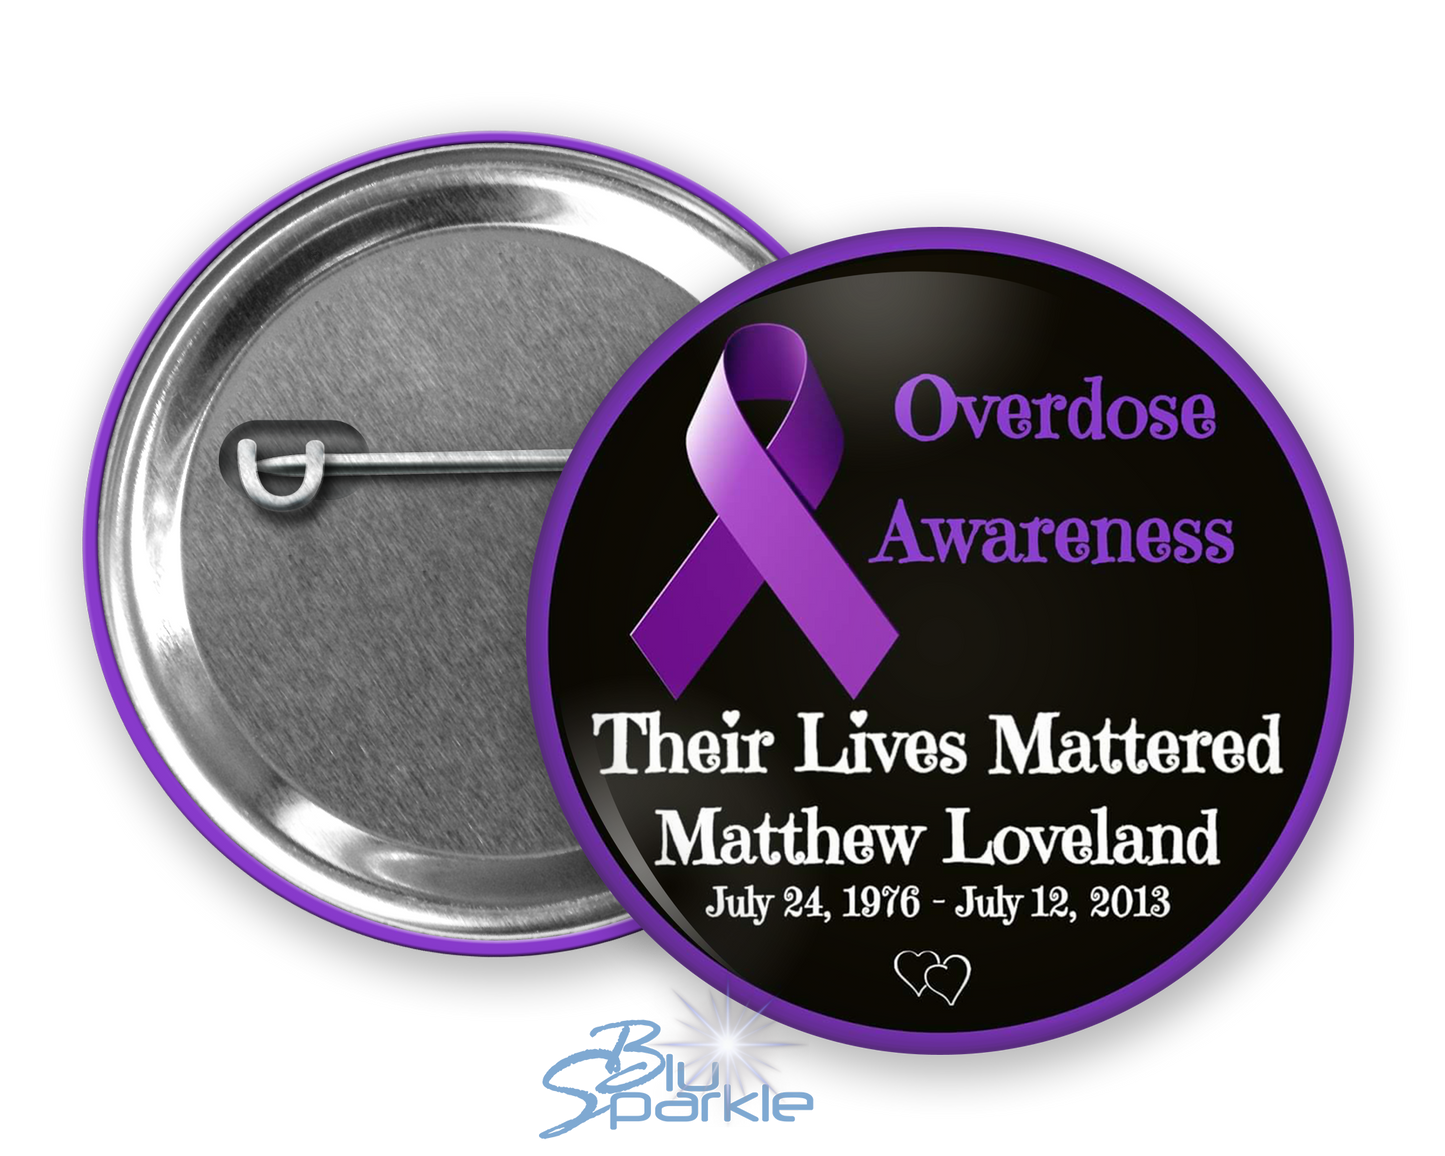 Personalized "Overdose Awareness: Their Lives Mattered" Pinback Buttons